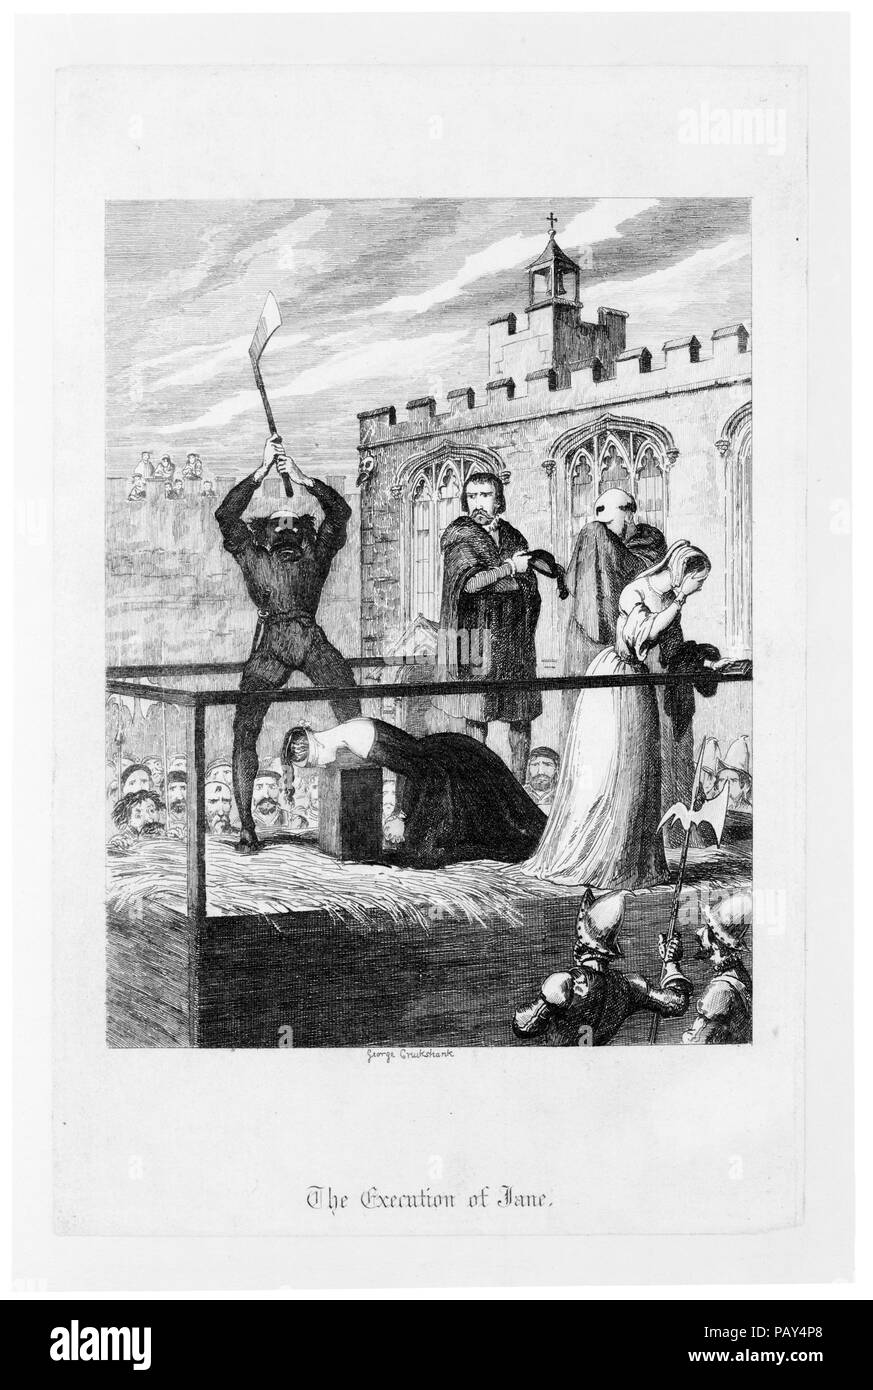 Engraving by George Cruikshank showing the execution of Lady Jane Grey on Tower Green in 1554. From The Tower of London / by W.H. Ainsworth (1845) Stock Photo